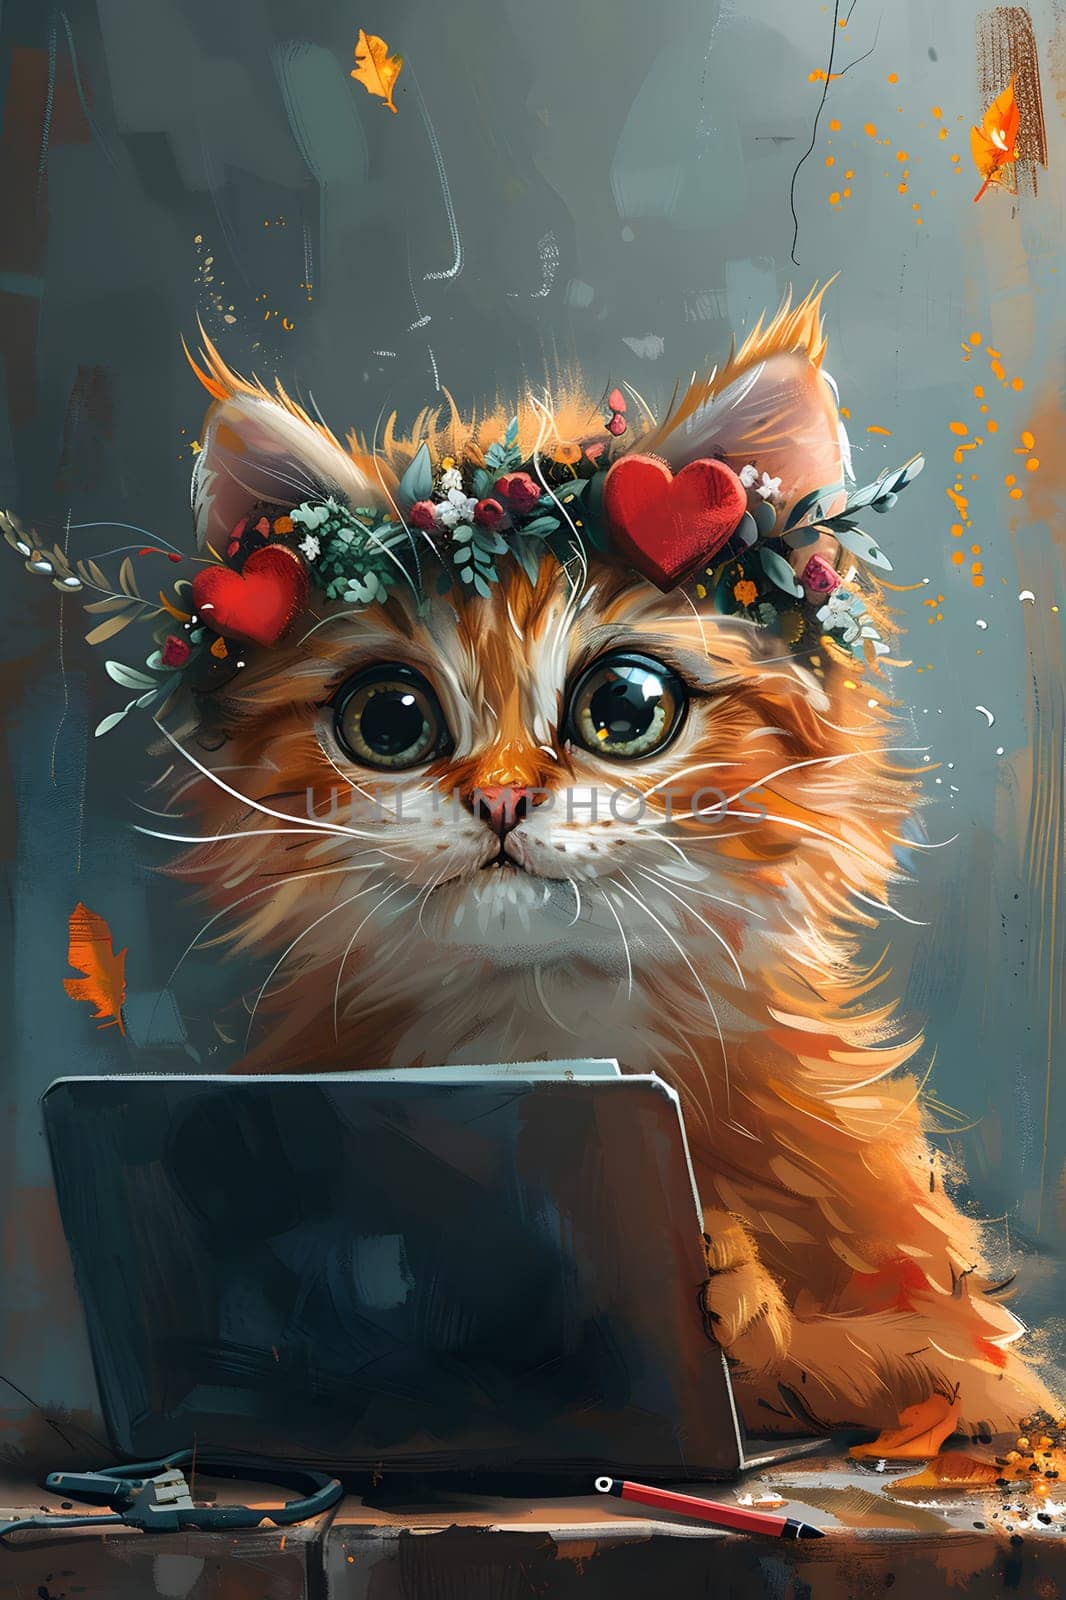 A Felidae wearing a flower crown is sitting in front of a laptop computer, making a cute scene for a painting or art project